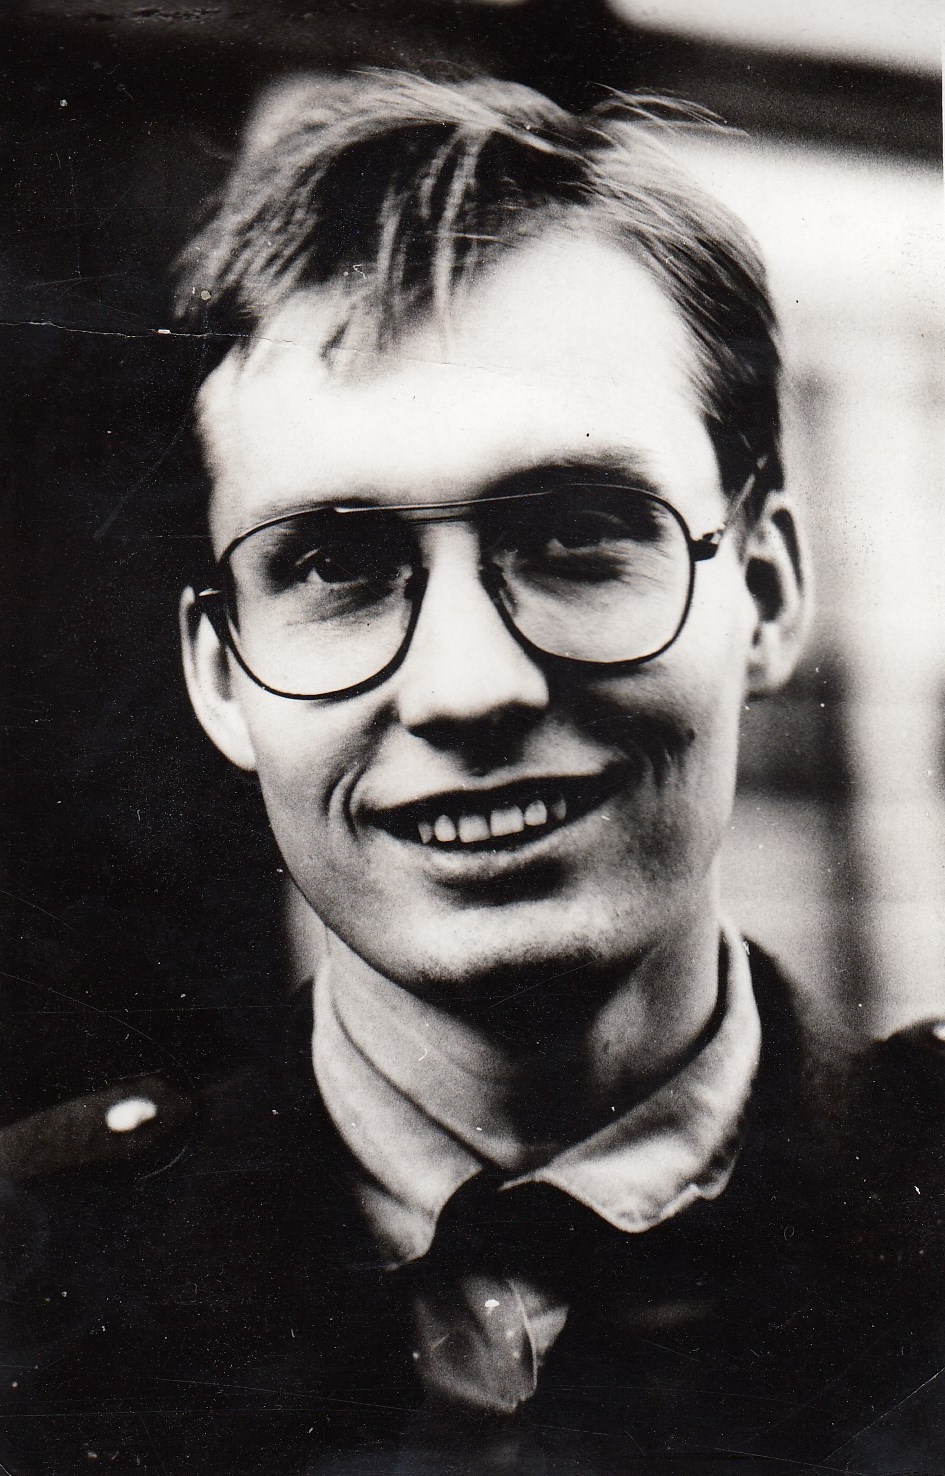 Marek Irgl during military service in 1989